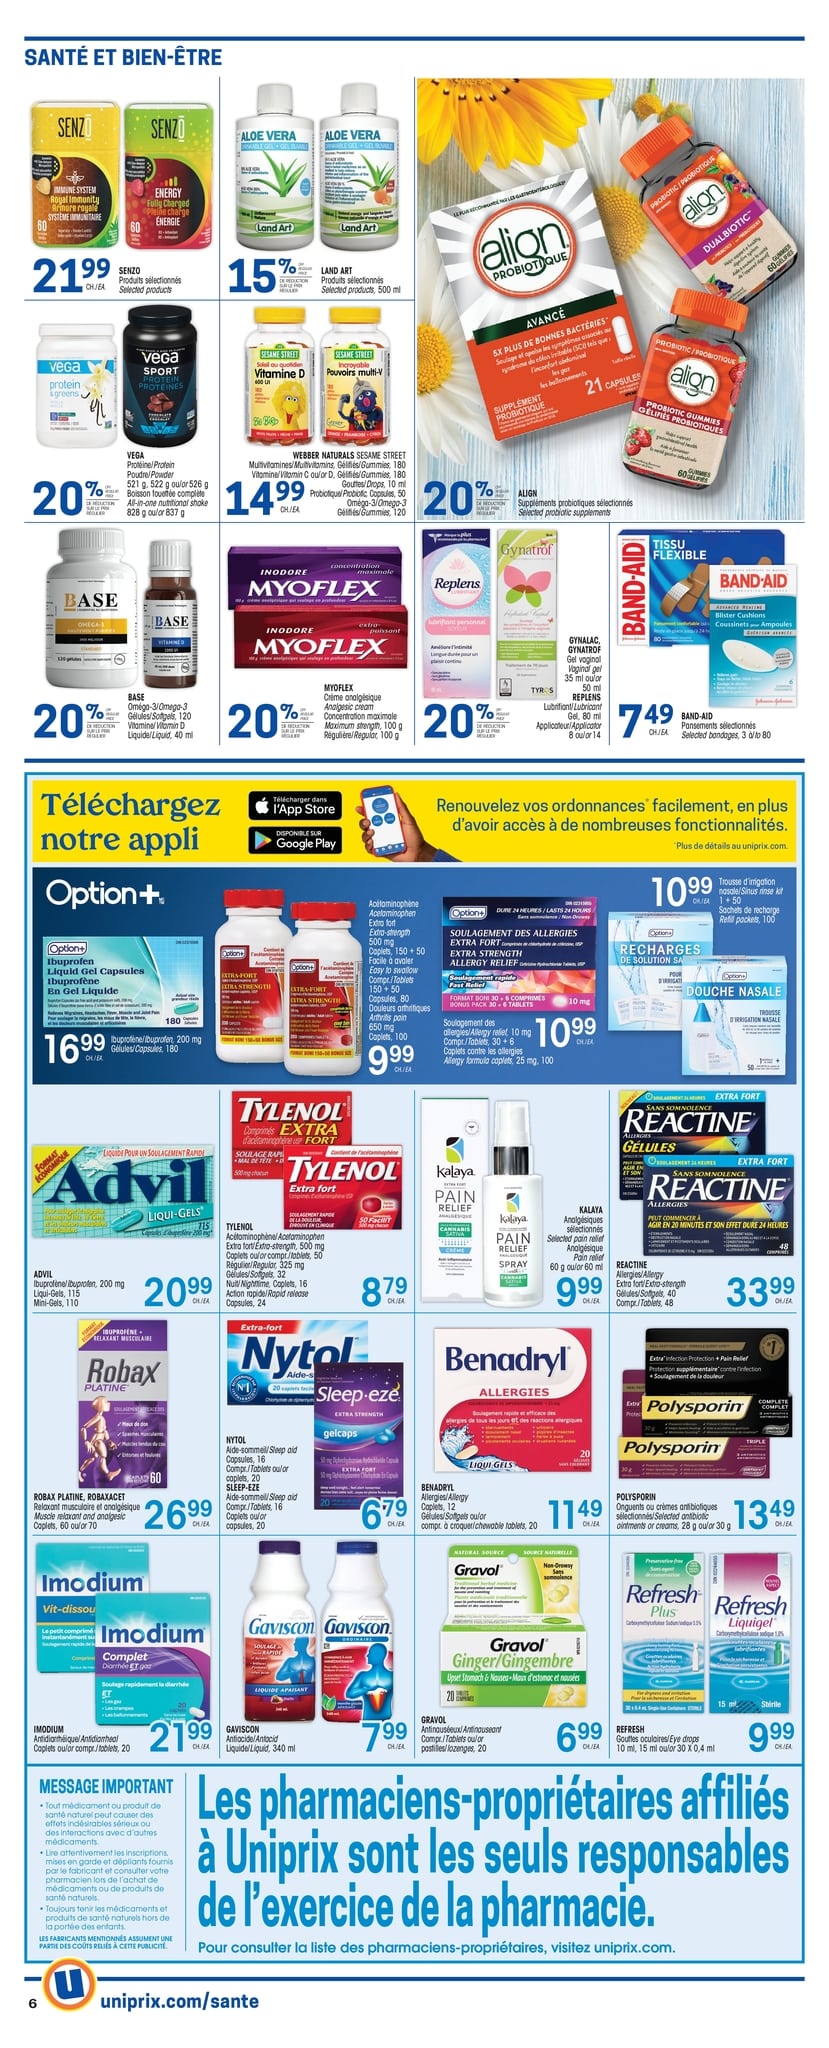 Uniprix - Weekly Flyer Specials - Page 10